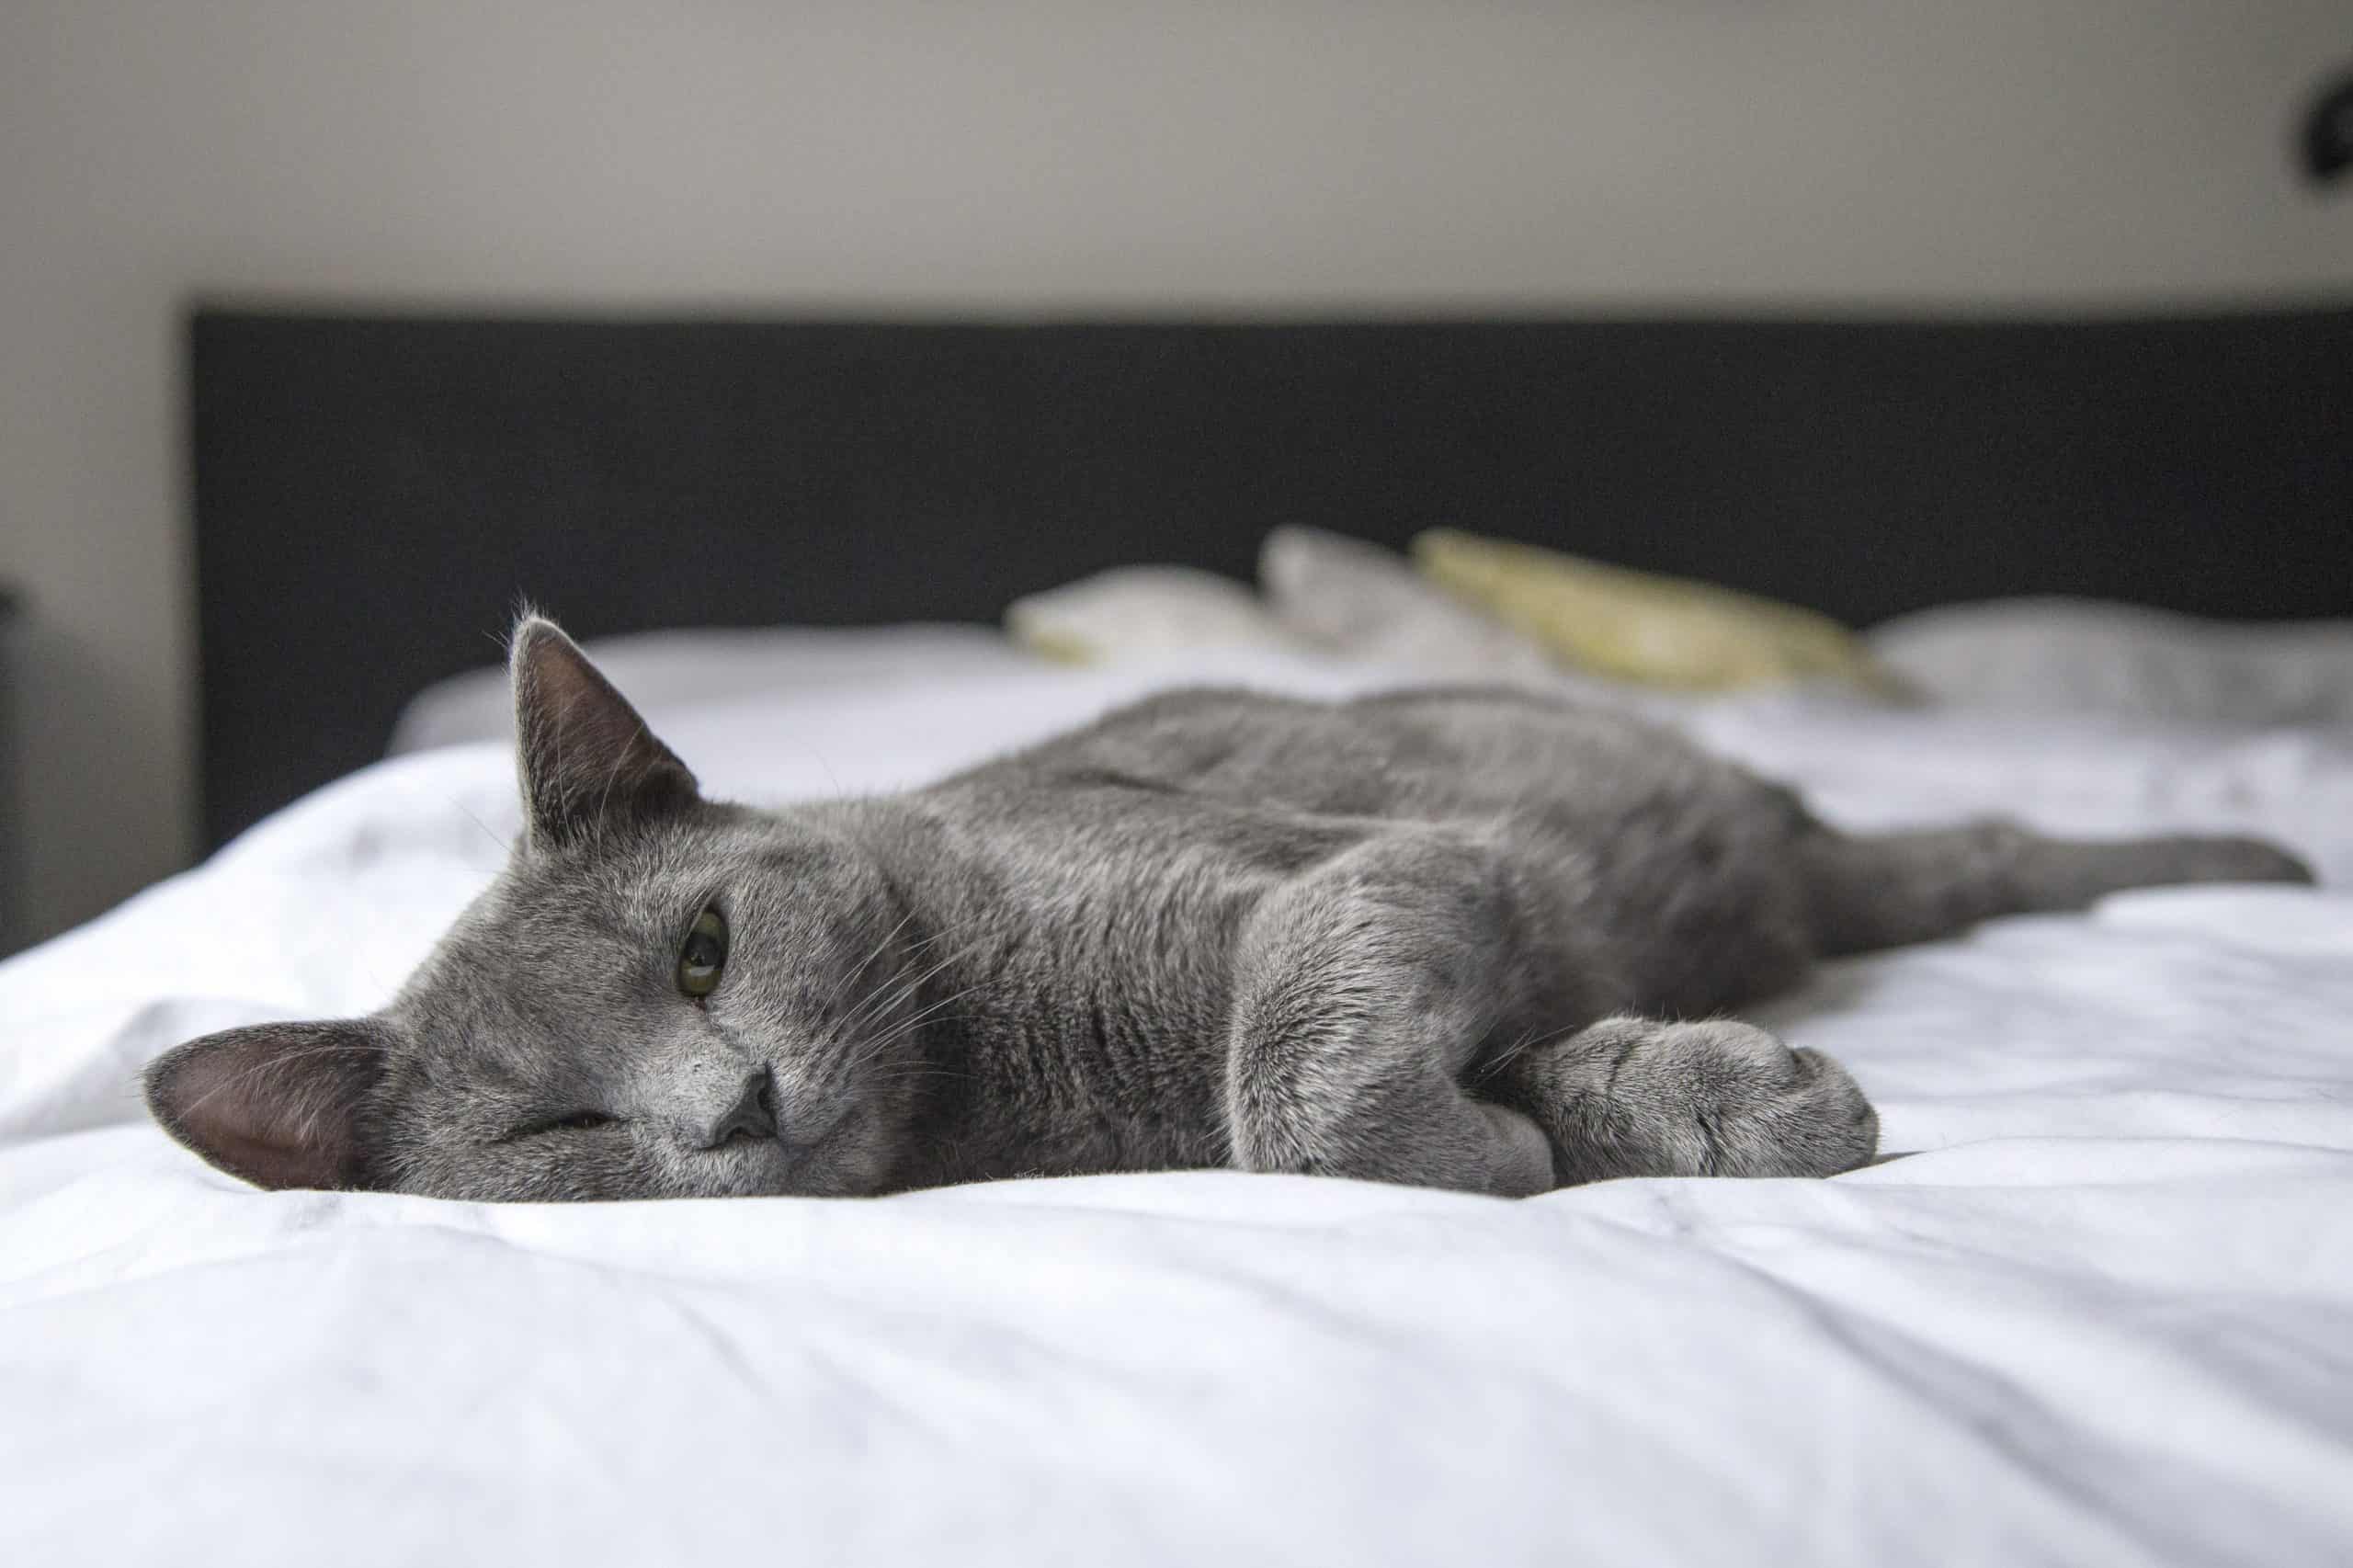 A relaxed grey cat lying on a white bedspread.